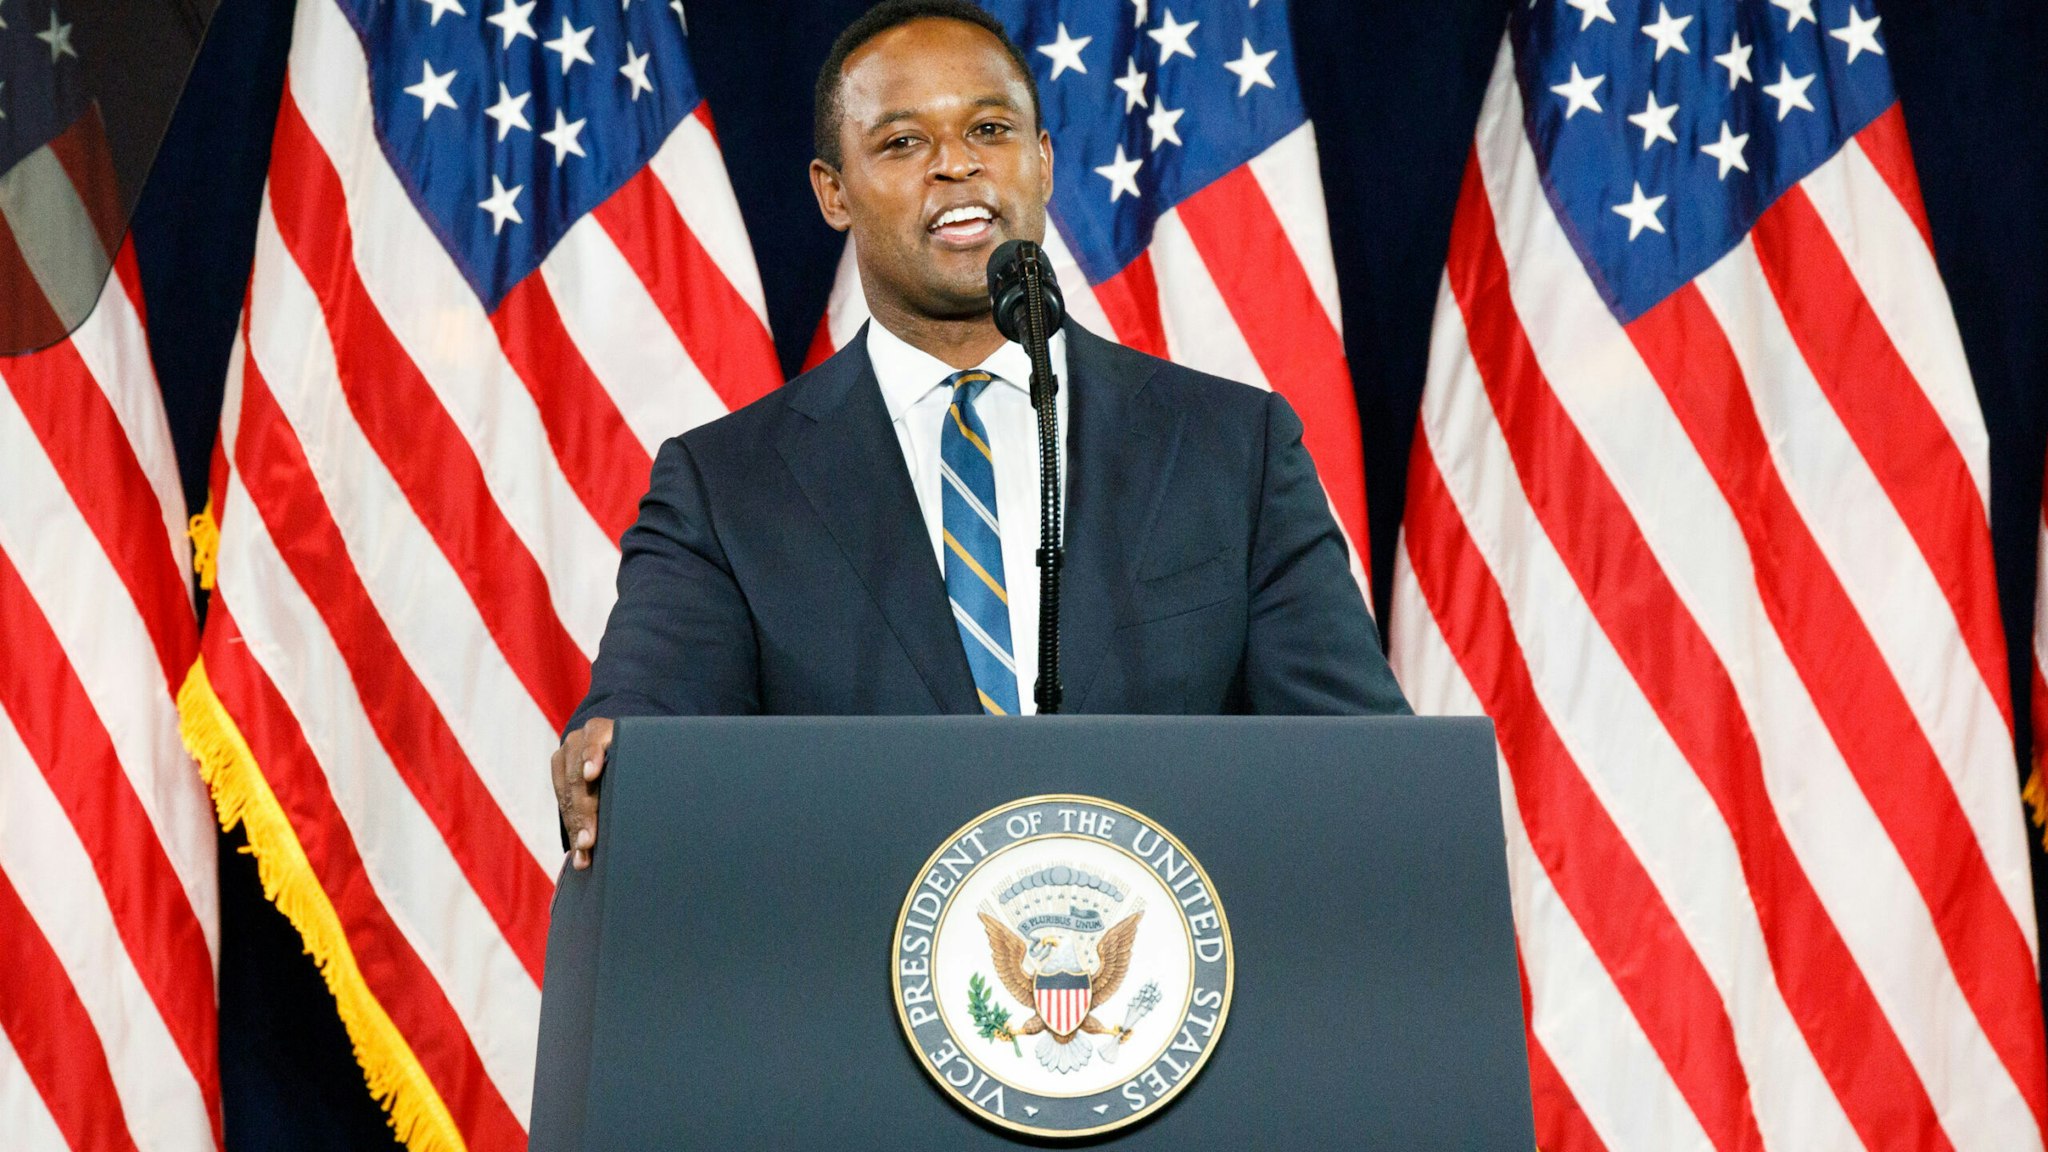 Daniel Cameron, Kentucky's attorney general-elect, speaks during the 'Black Voices for Trump' launch event with U.S. President Donald Trump, not pictured, in Atlanta, Georgia, U.S., on Friday, Nov. 8, 2019. Trump has alienated large swathes of minority communities during his presidency, but he thinks he has an argument to win some of them over in the 2020 election: the economy.